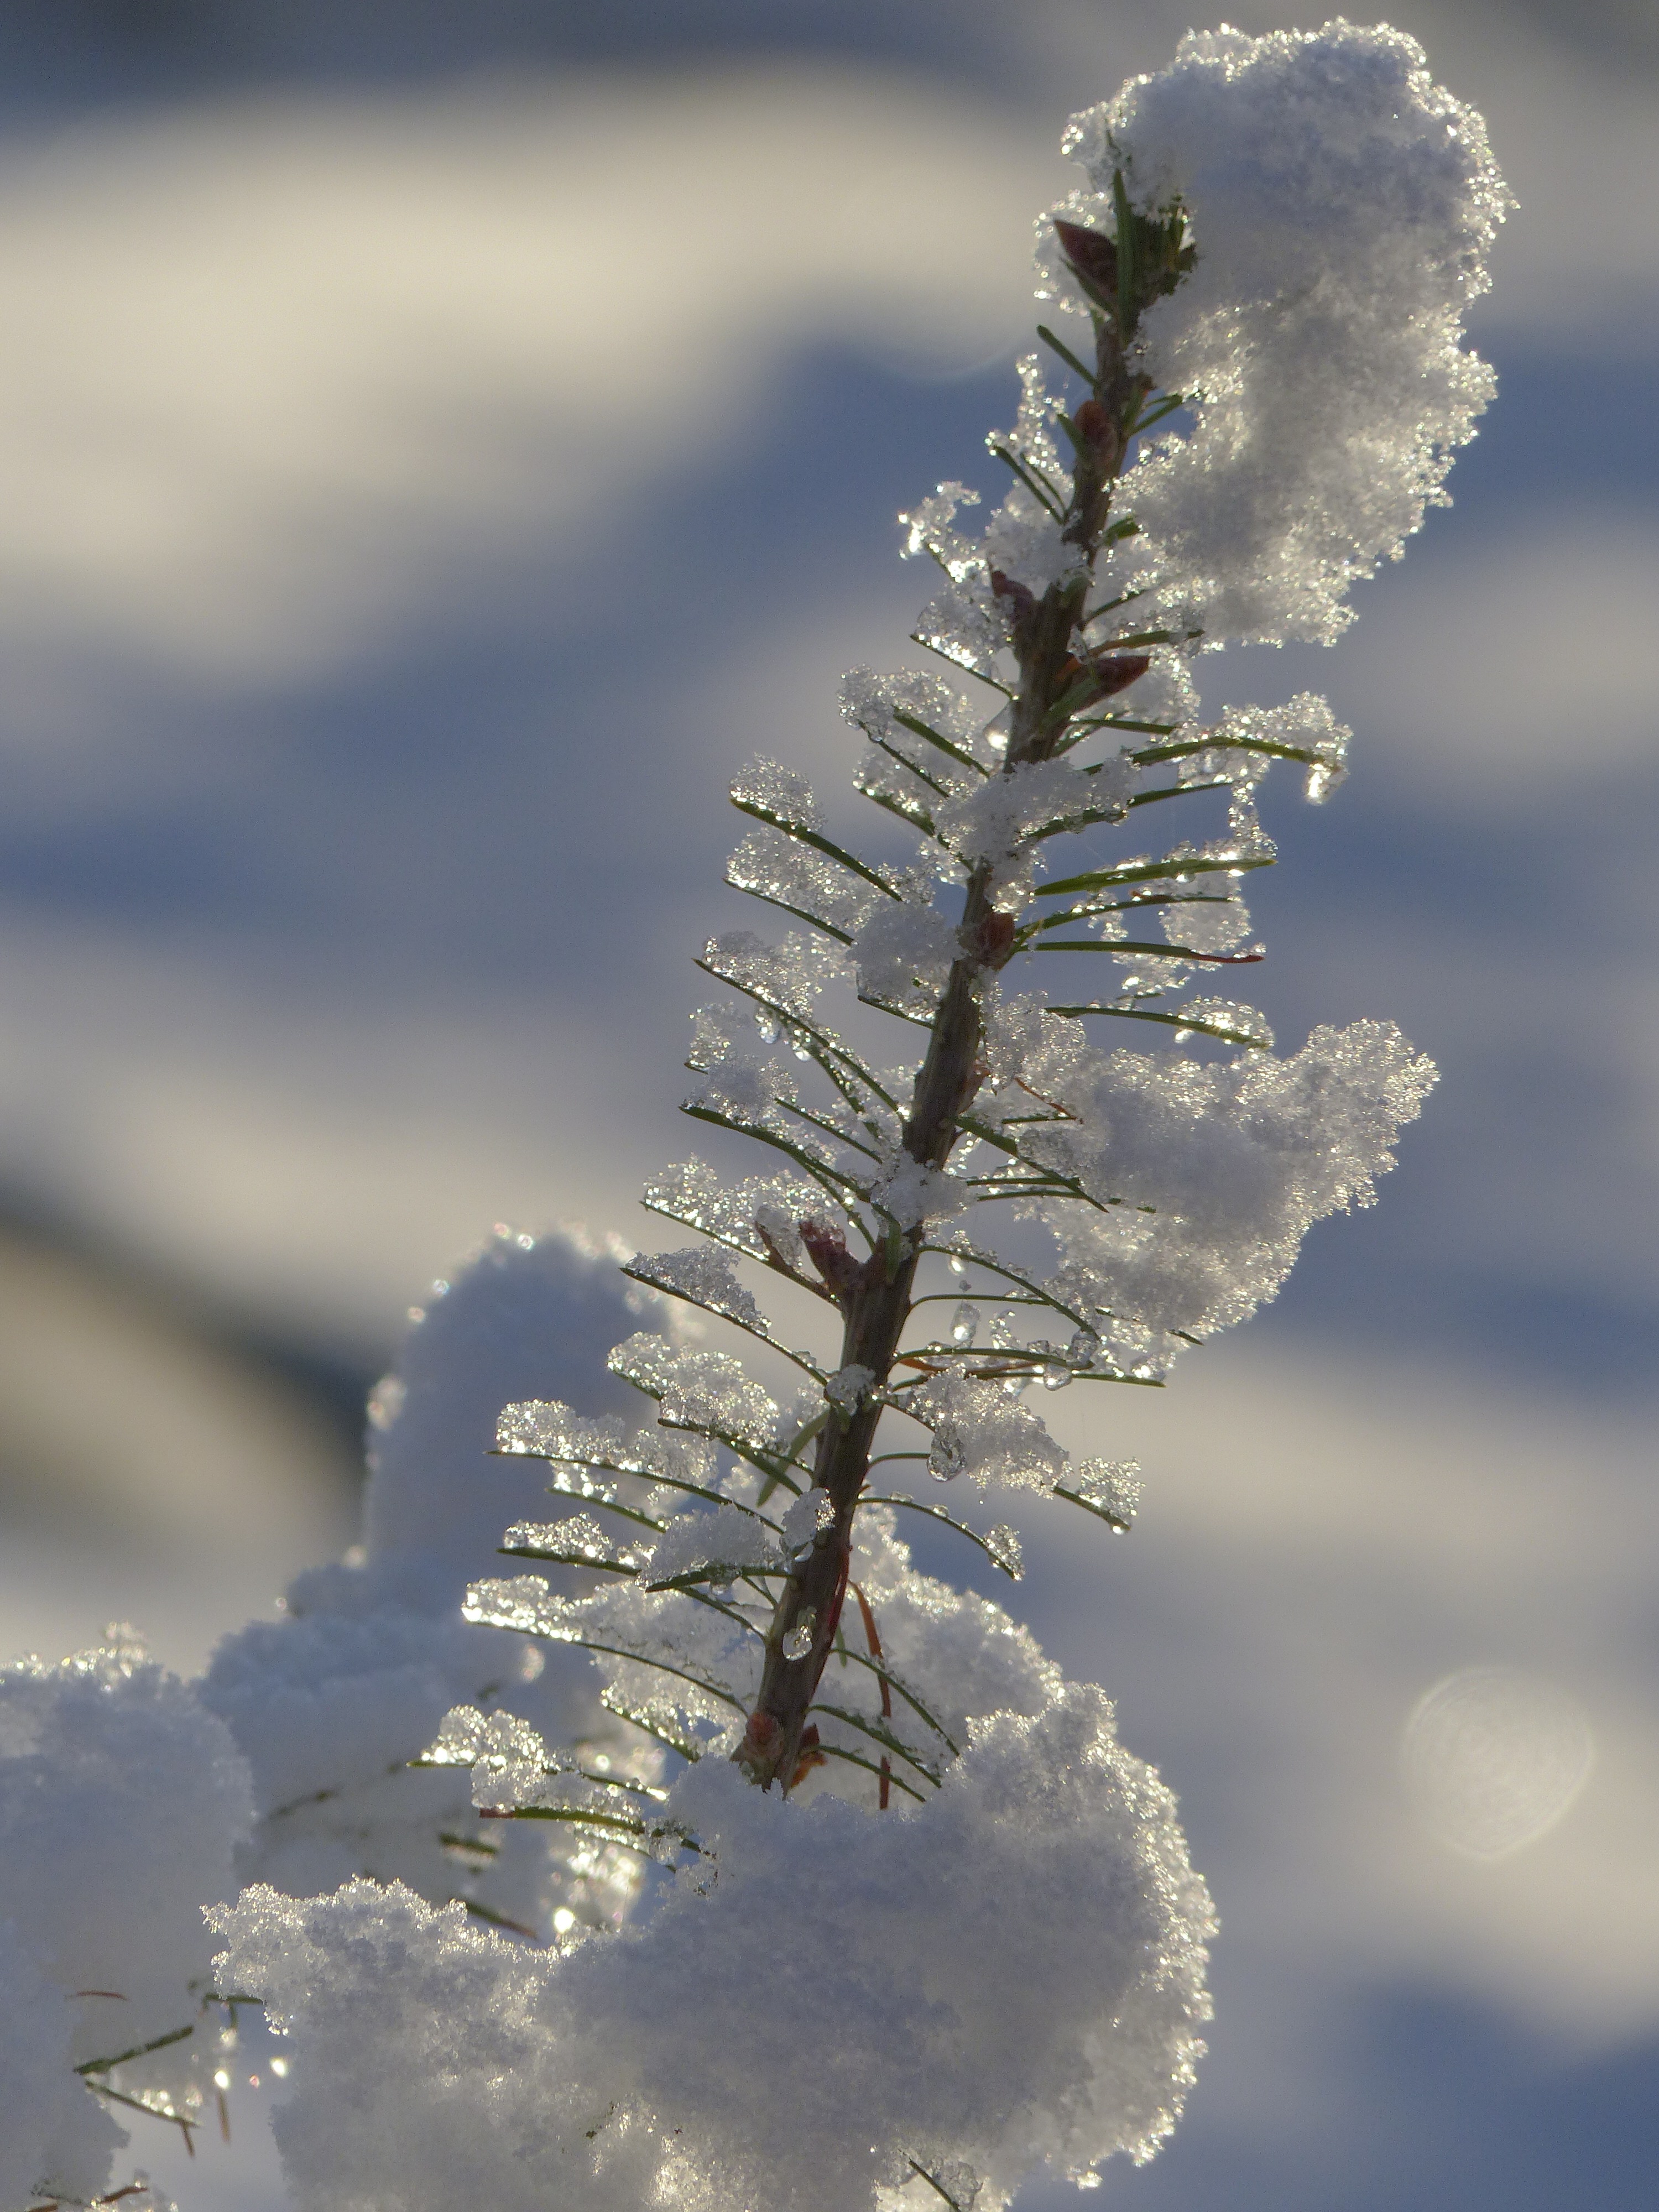 Free Image, landscape, tree, nature, forest, branch, cold, winter, cloud, sky, sunlight, morning, frost, daytime, ice, spring, scenery, fir, season, twig, conifer, close up, trees, dream, spruce, canada, early, freezing, macro